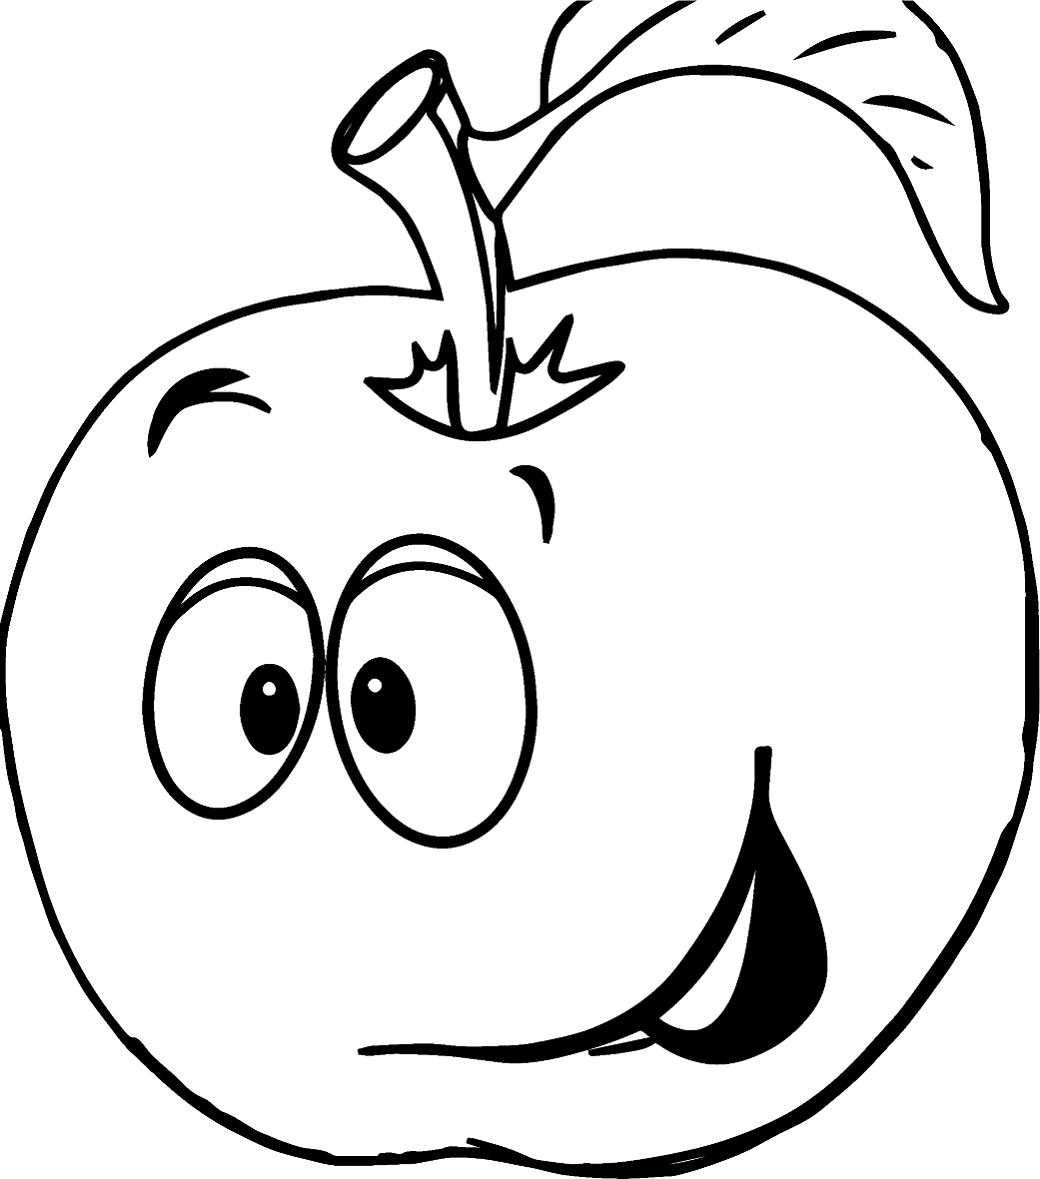 Fruit Cartoon Apple Coloring Page